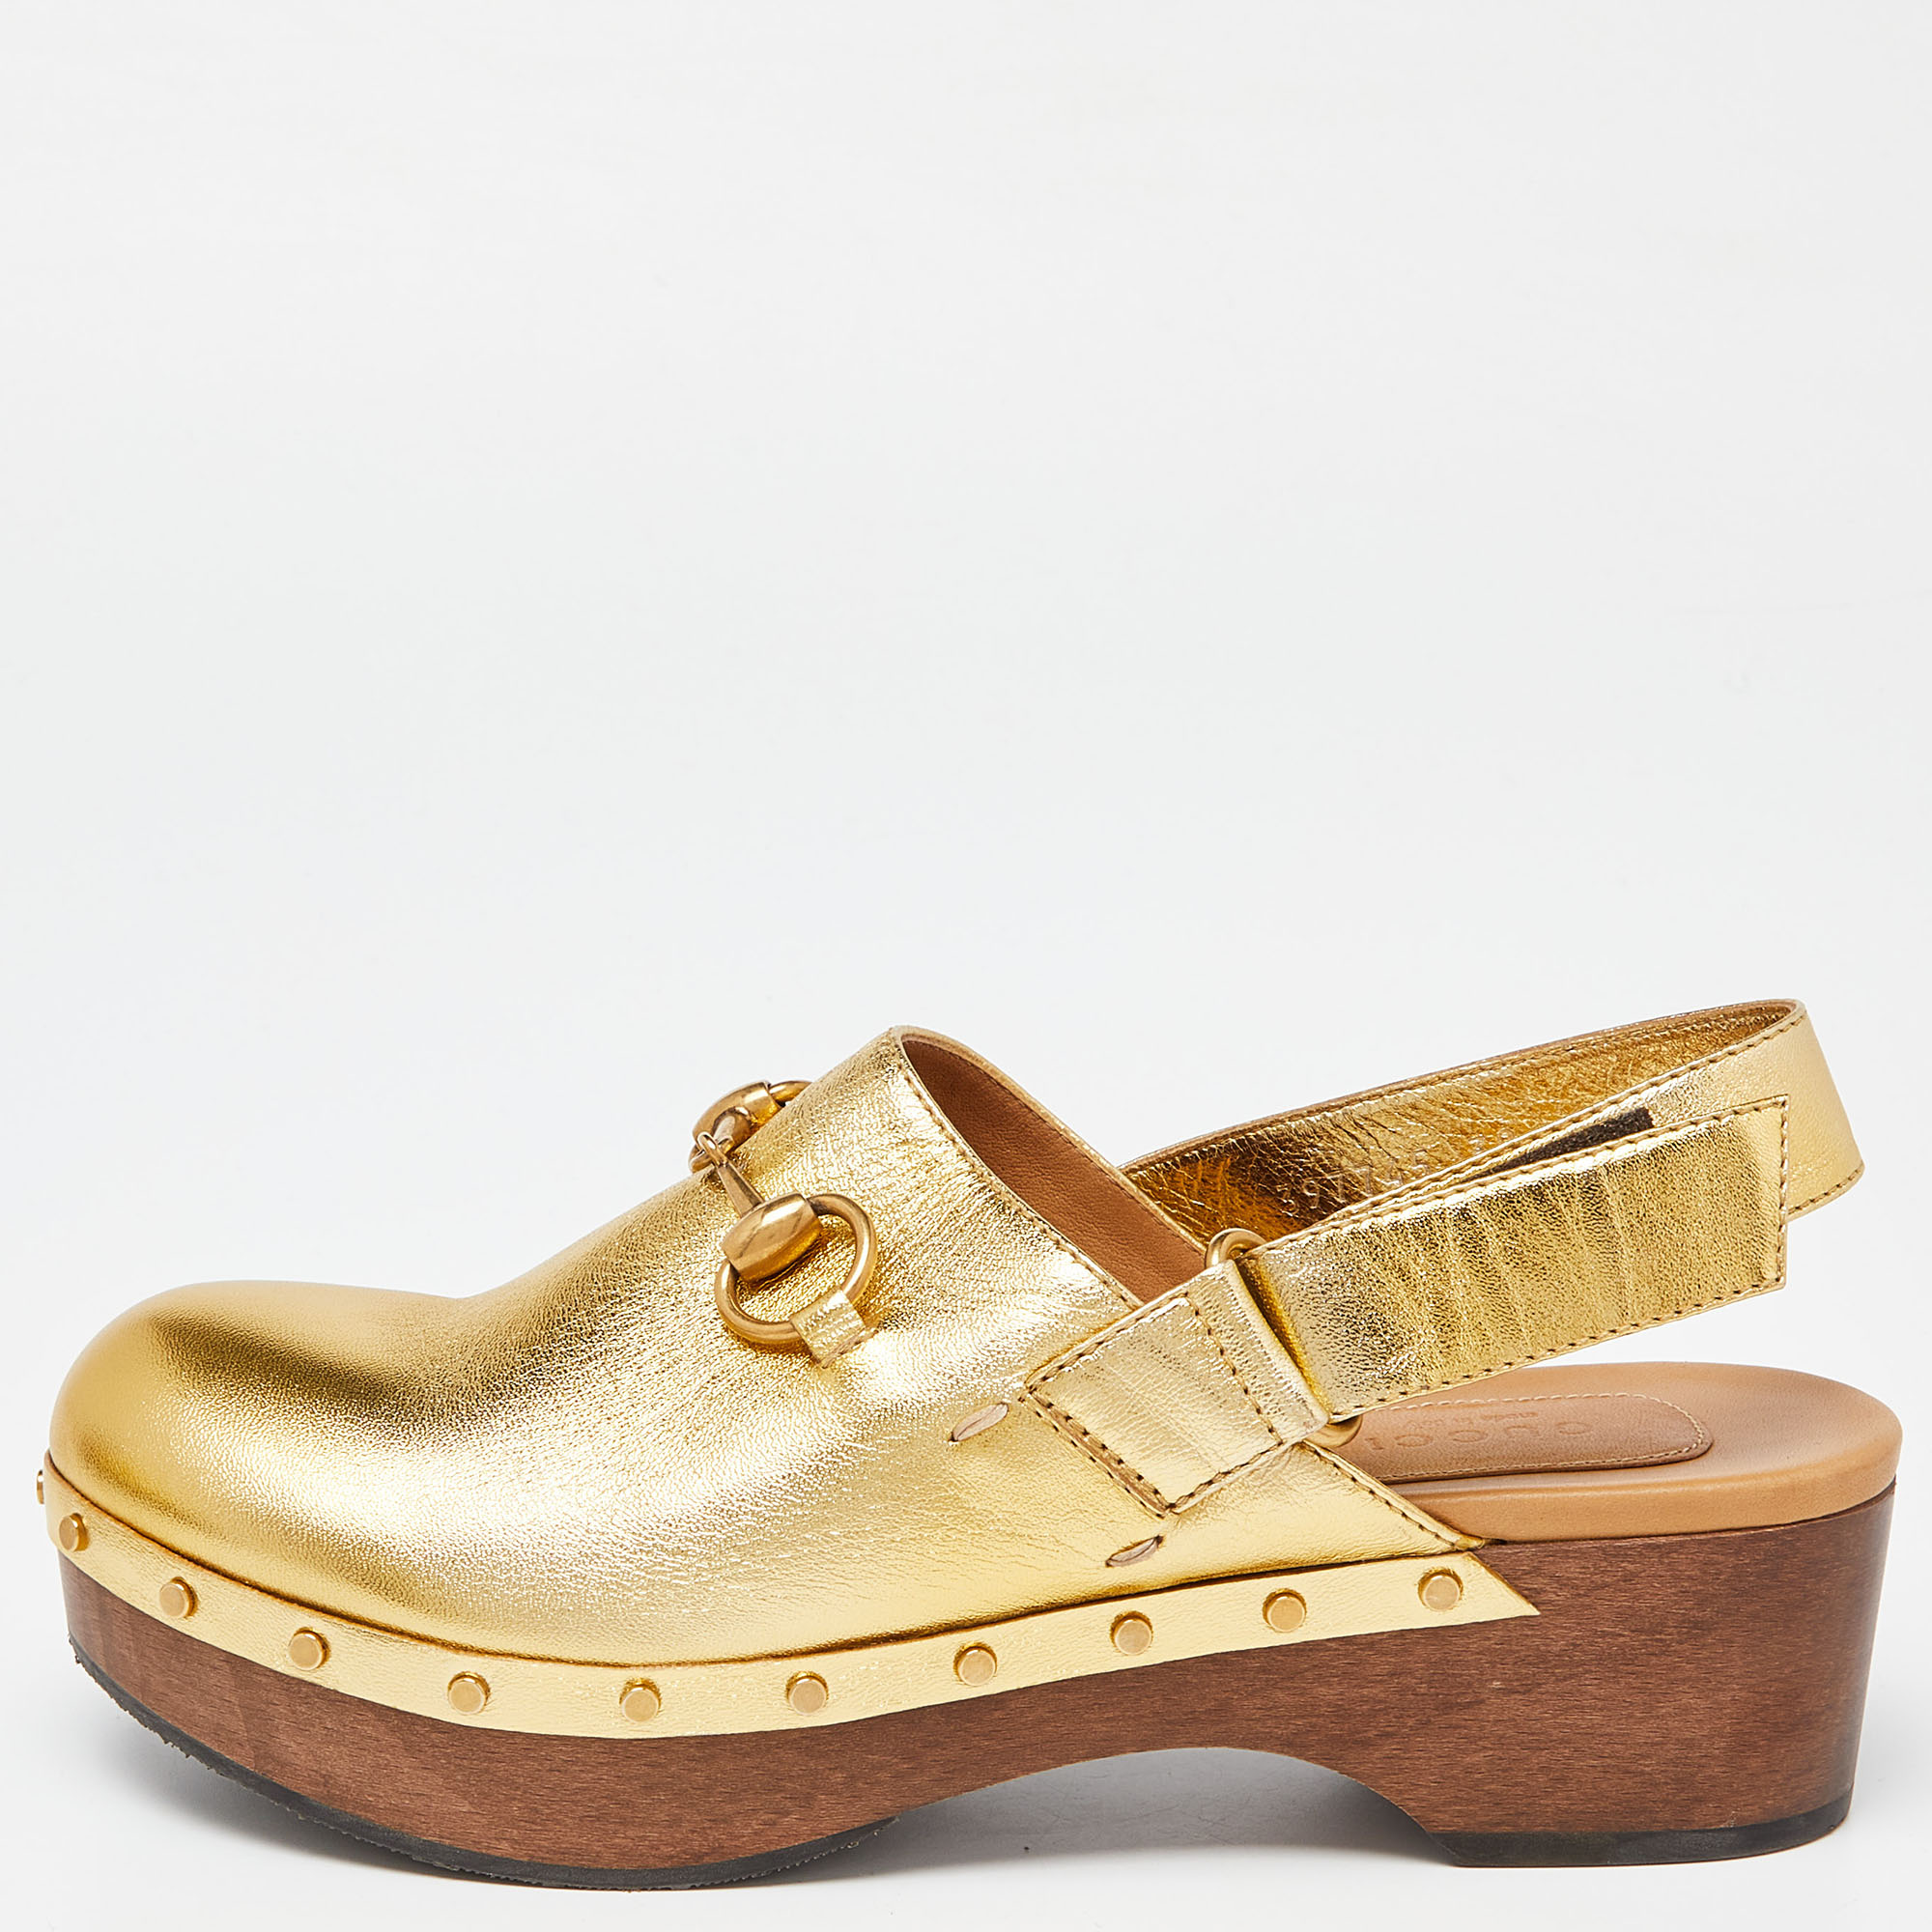 Pre-owned Gucci Gold Leather Amstel Horsebit Slingback Clog Sandals Size 38